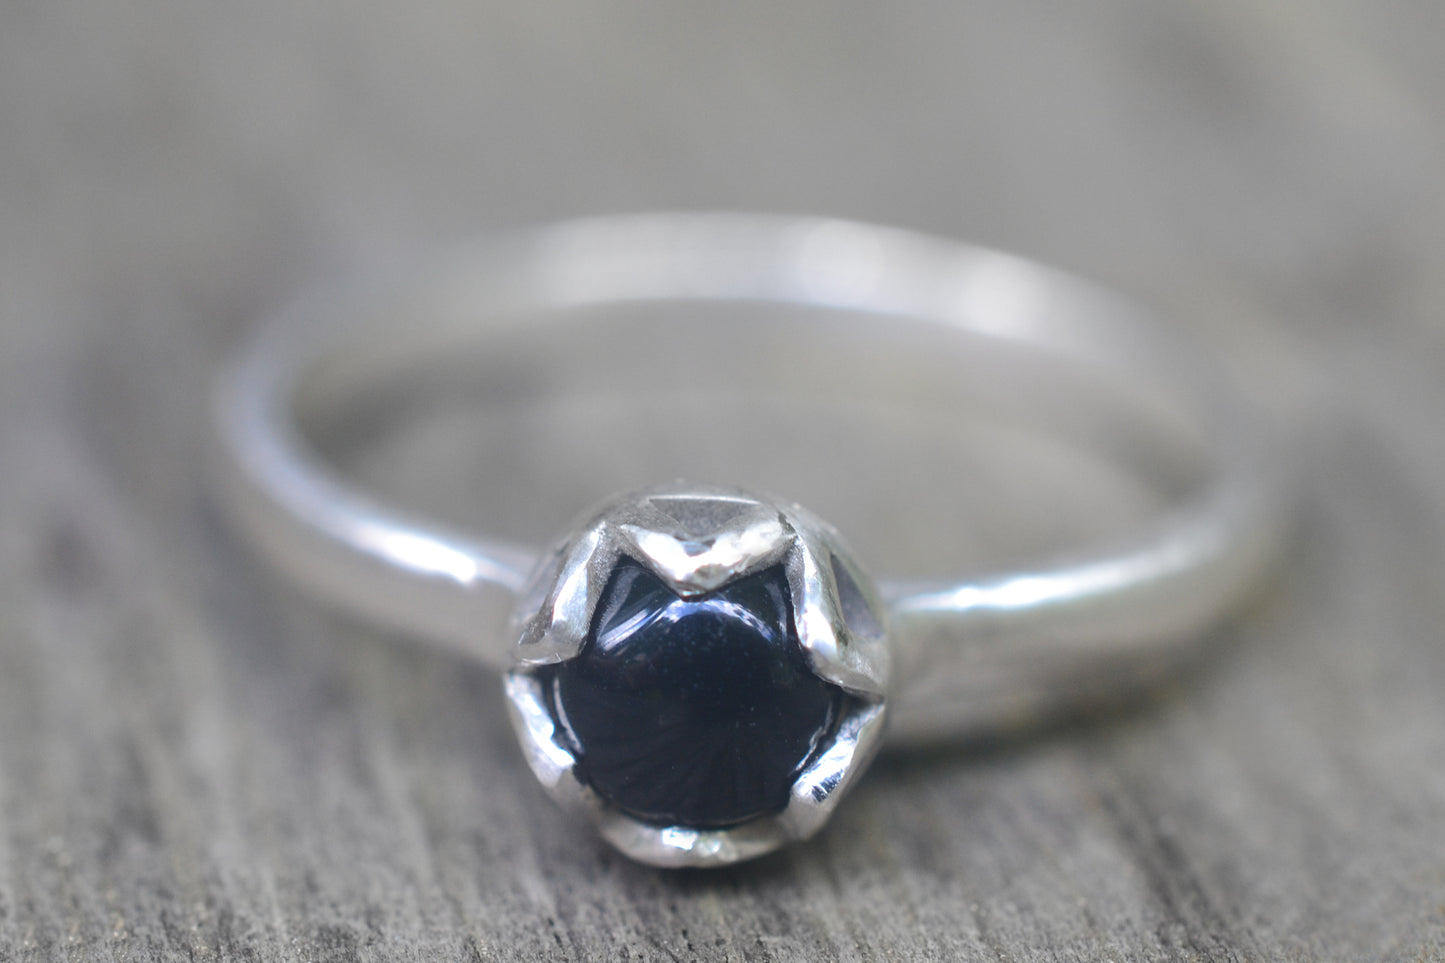 Round Black Onyx Ring In Sterling Silver